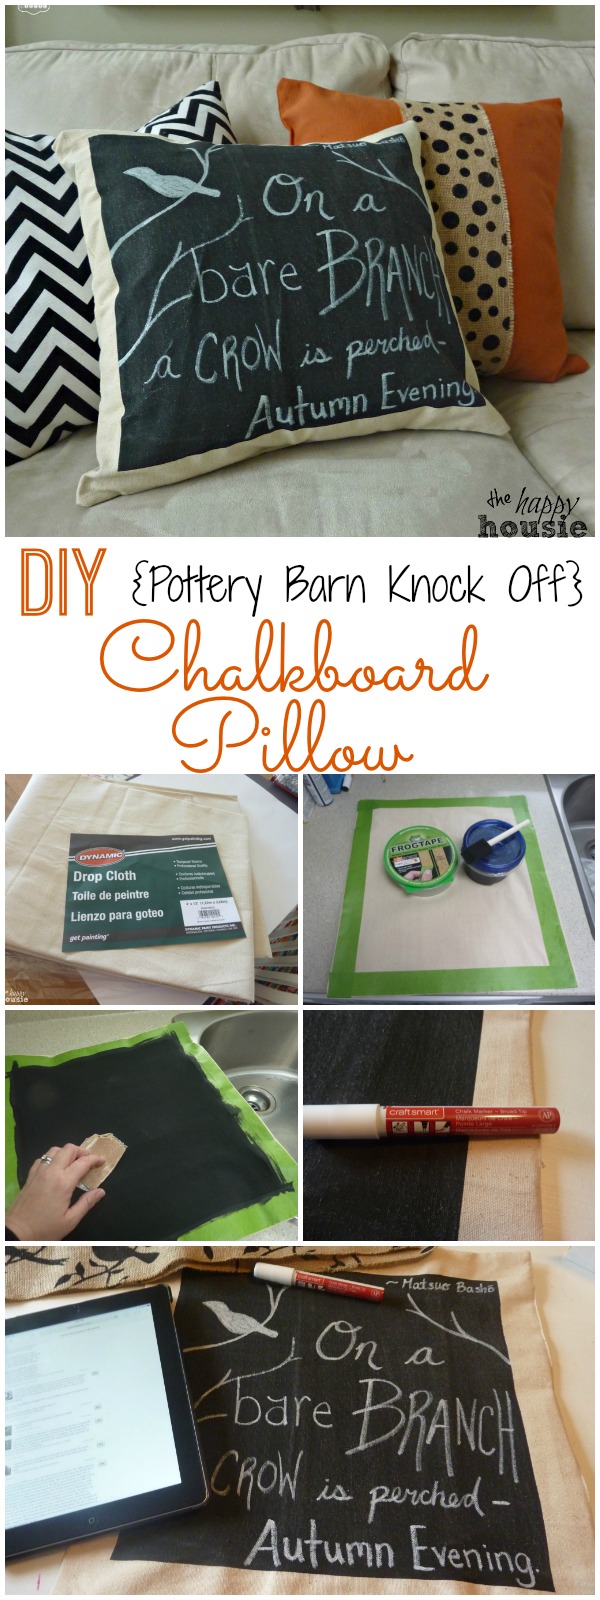 How to make your own DIY Pottery Barn Knock Off Chalkboard Pillow - perfect for holiday decor- transitions from Fall to Halloween to Christmas all in one - at The Happy Housie